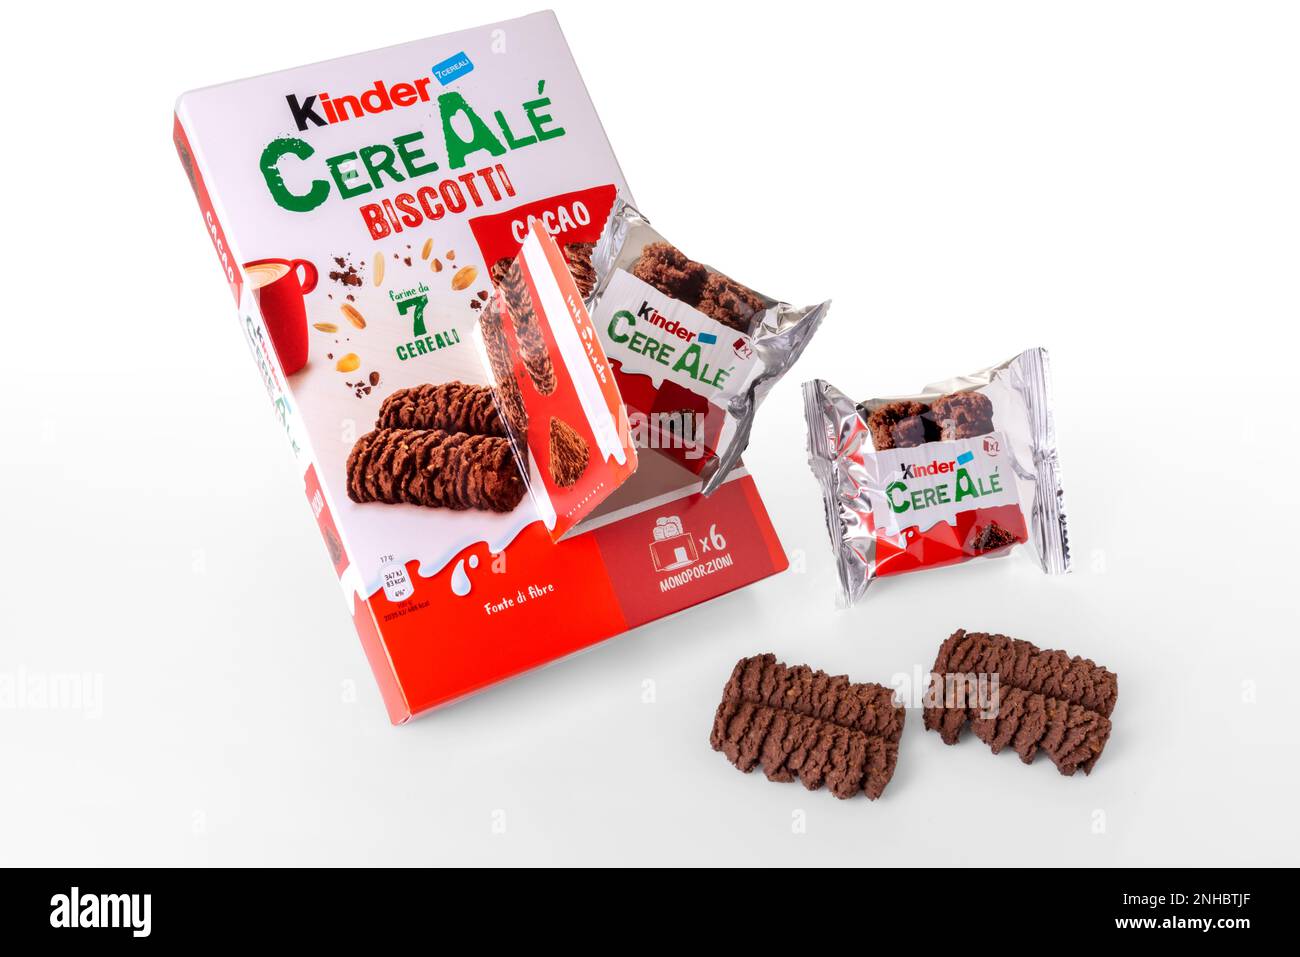 Alba, Italy - February 20, 2023: Kinder CereAle Ferrero box, packs and cookies made with seven cereales and cocoa isolated on white and clipping path Stock Photo